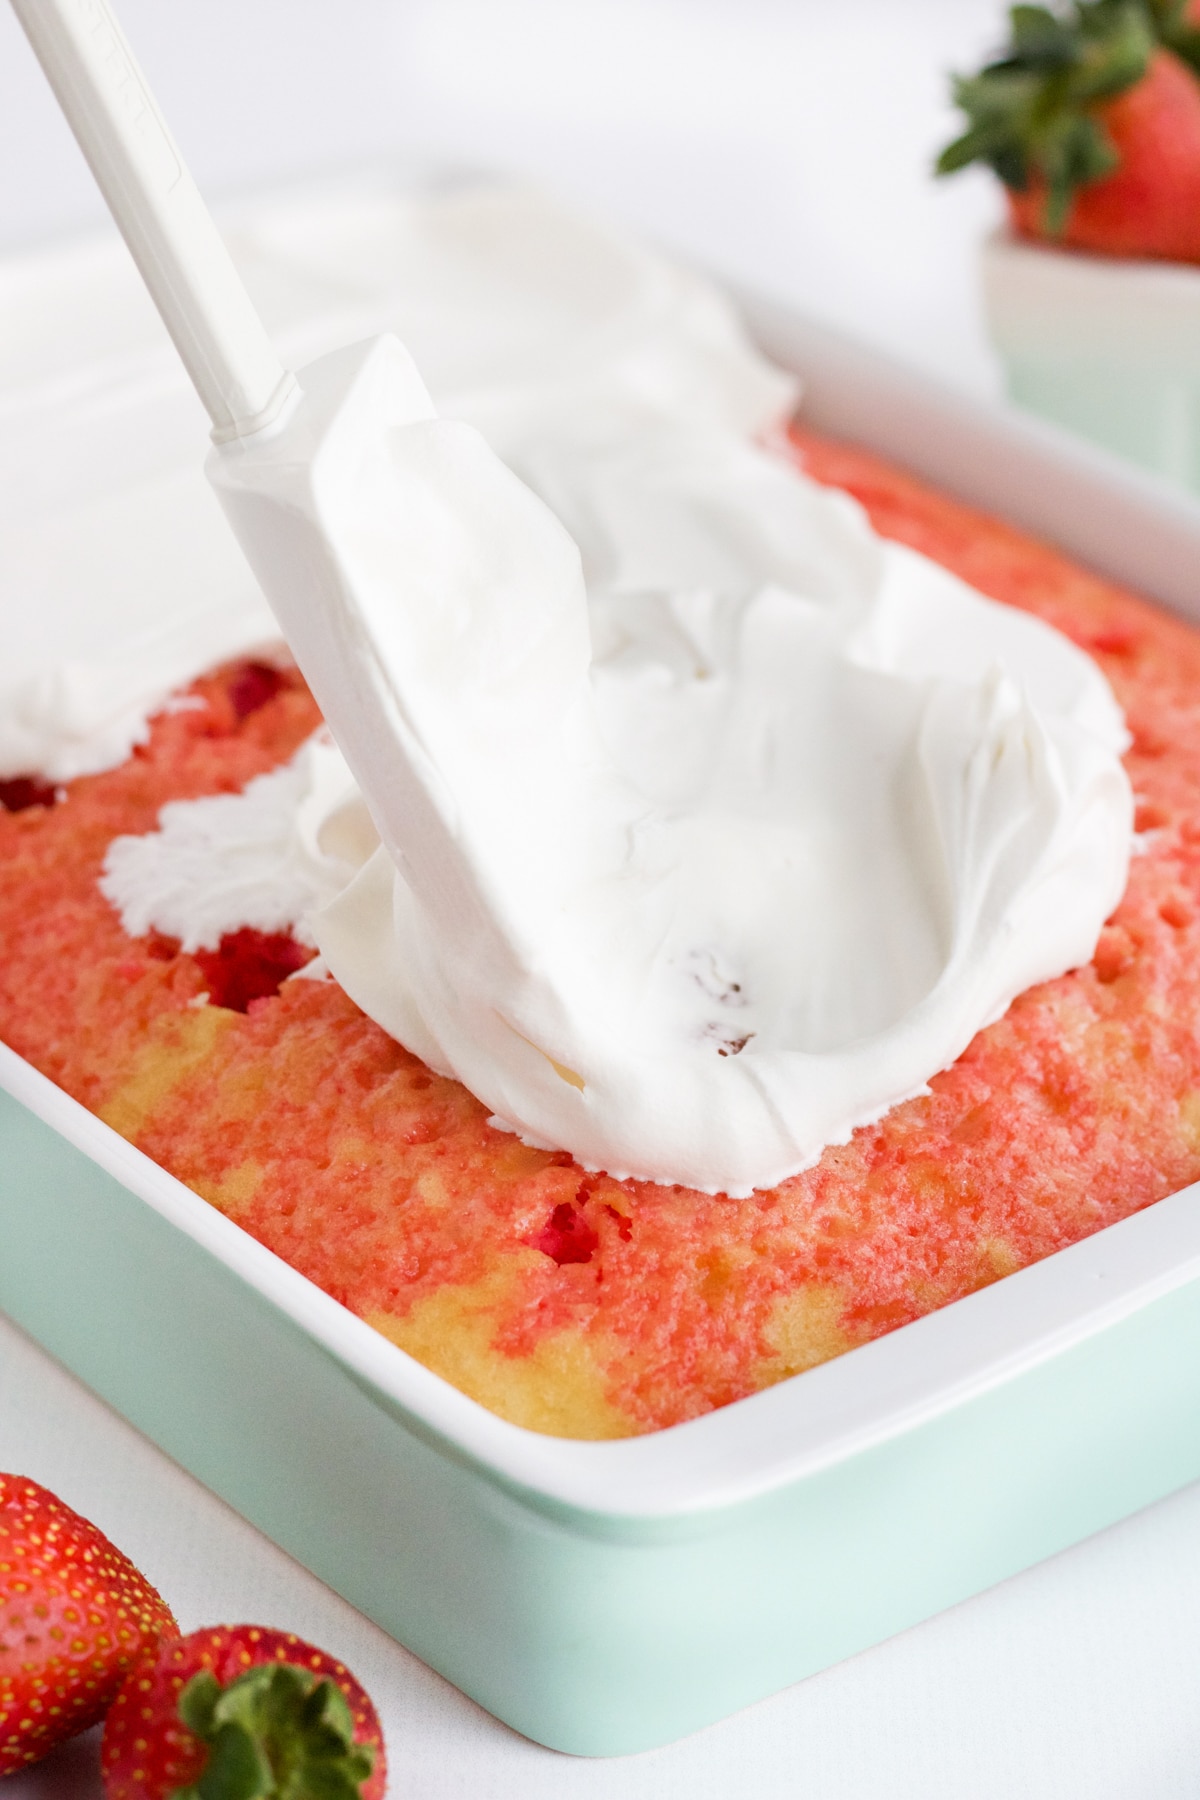 spreading whipping topping over a chilled strawberry cake in a ceramic baking pan